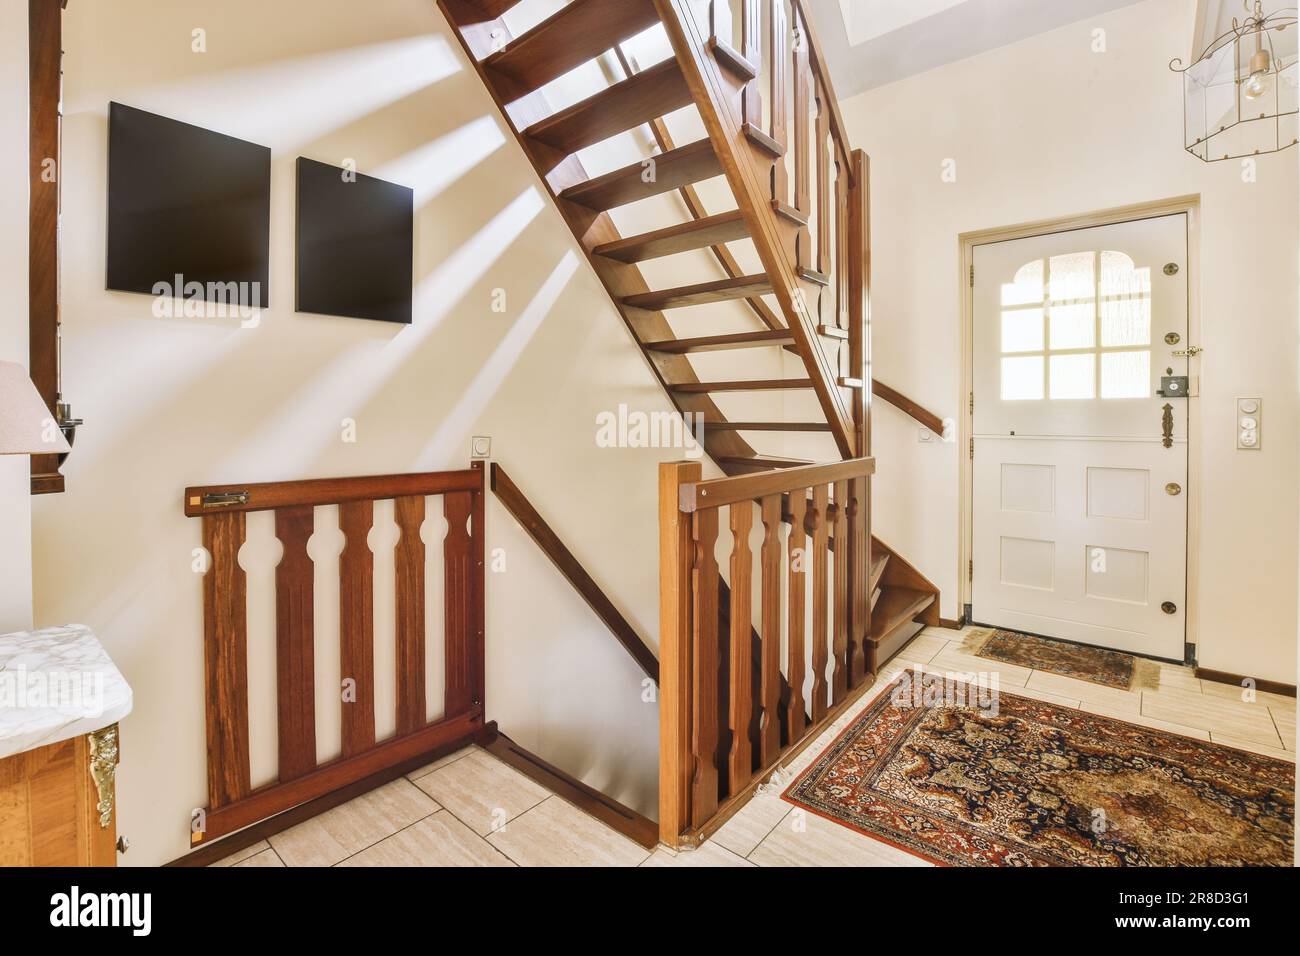 https://c8.alamy.com/comp/2R8D3G1/a-stairway-way-in-a-house-with-wood-railing-and-handrails-on-either-side-leading-up-to-the-front-door-2R8D3G1.jpg